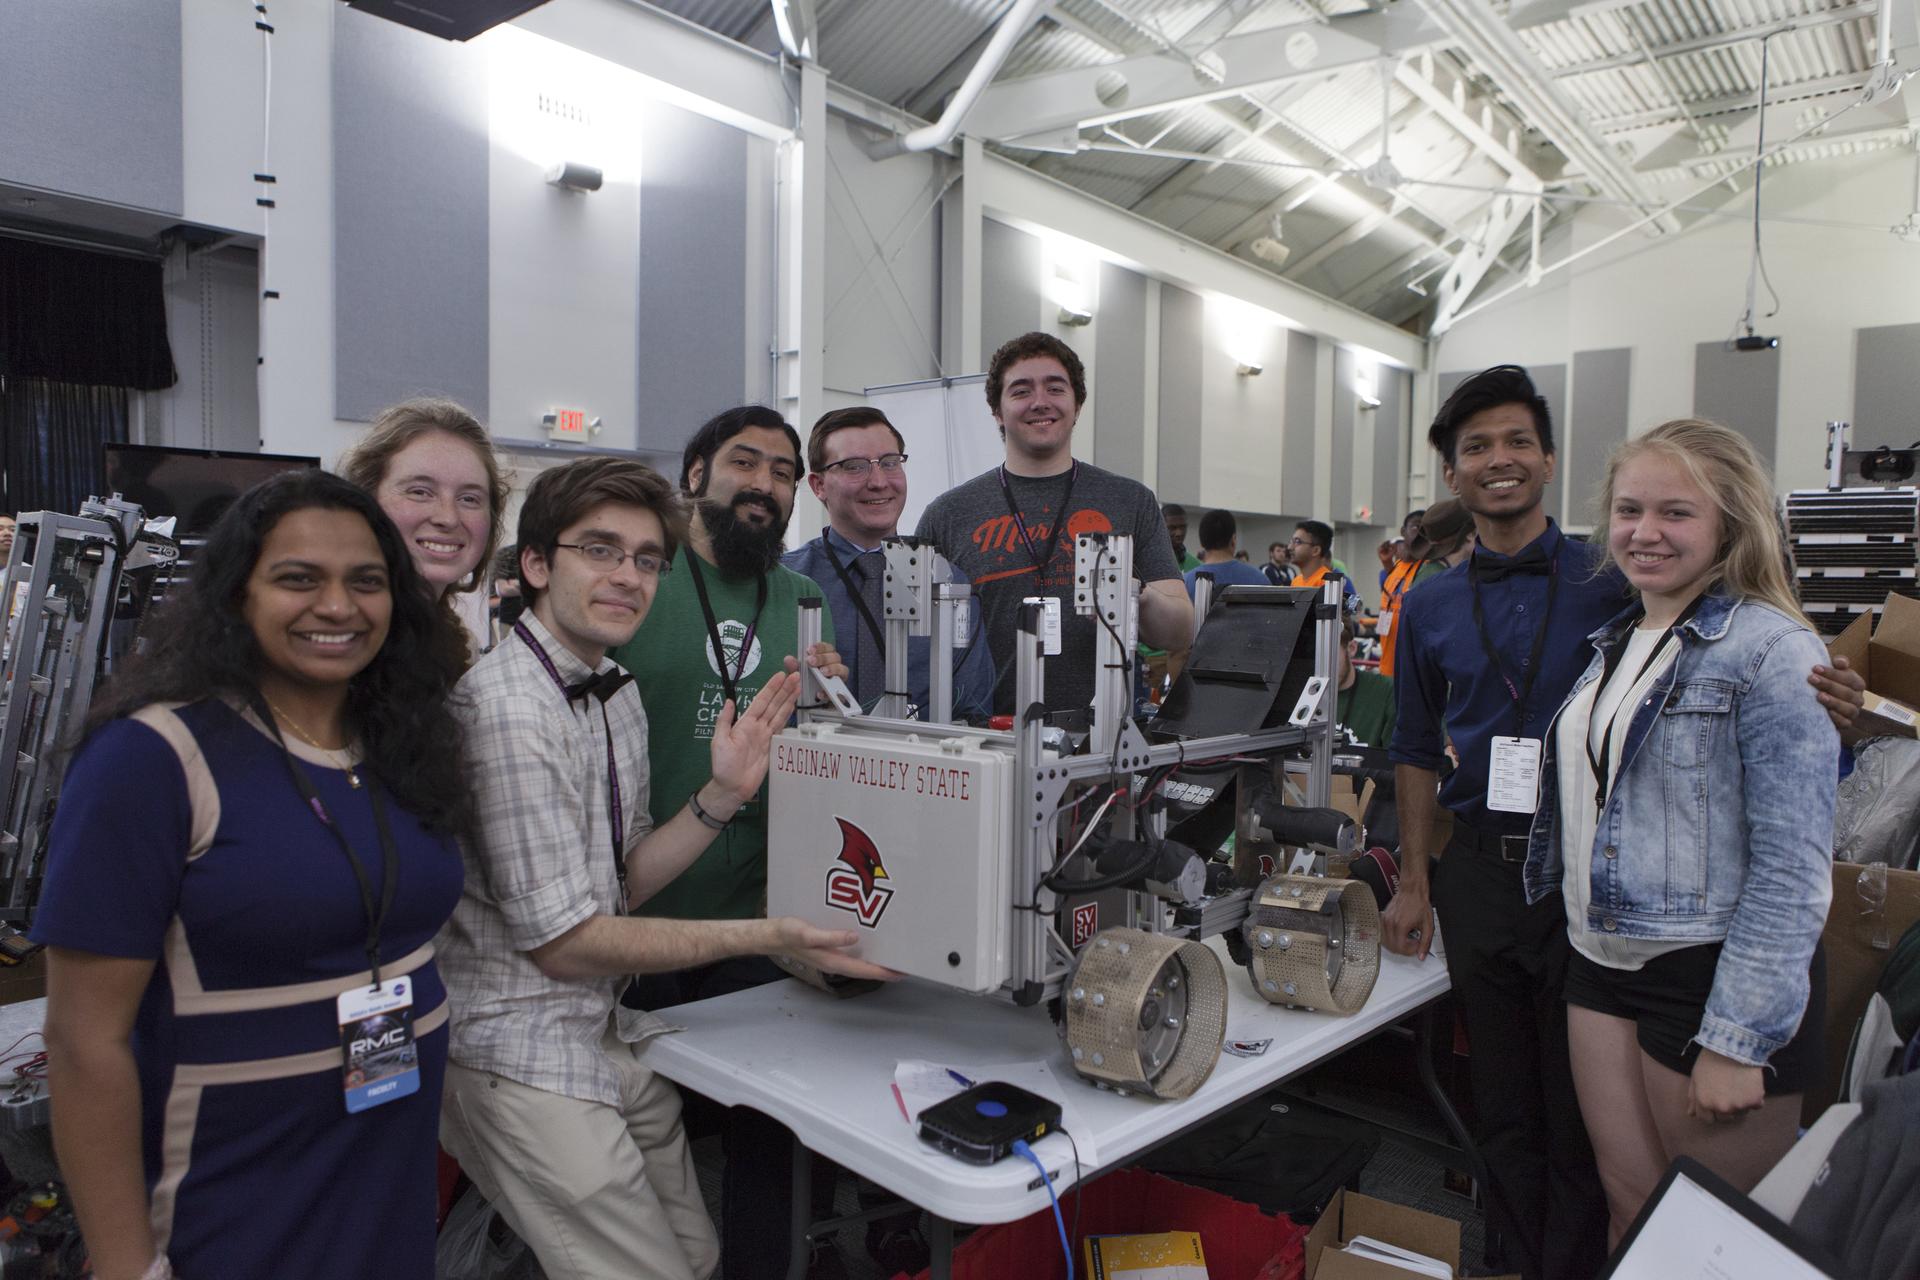 Students from Saginaw Valley State University pose for a photo at NASA's 9th Robotic Mining Competition on May 17.